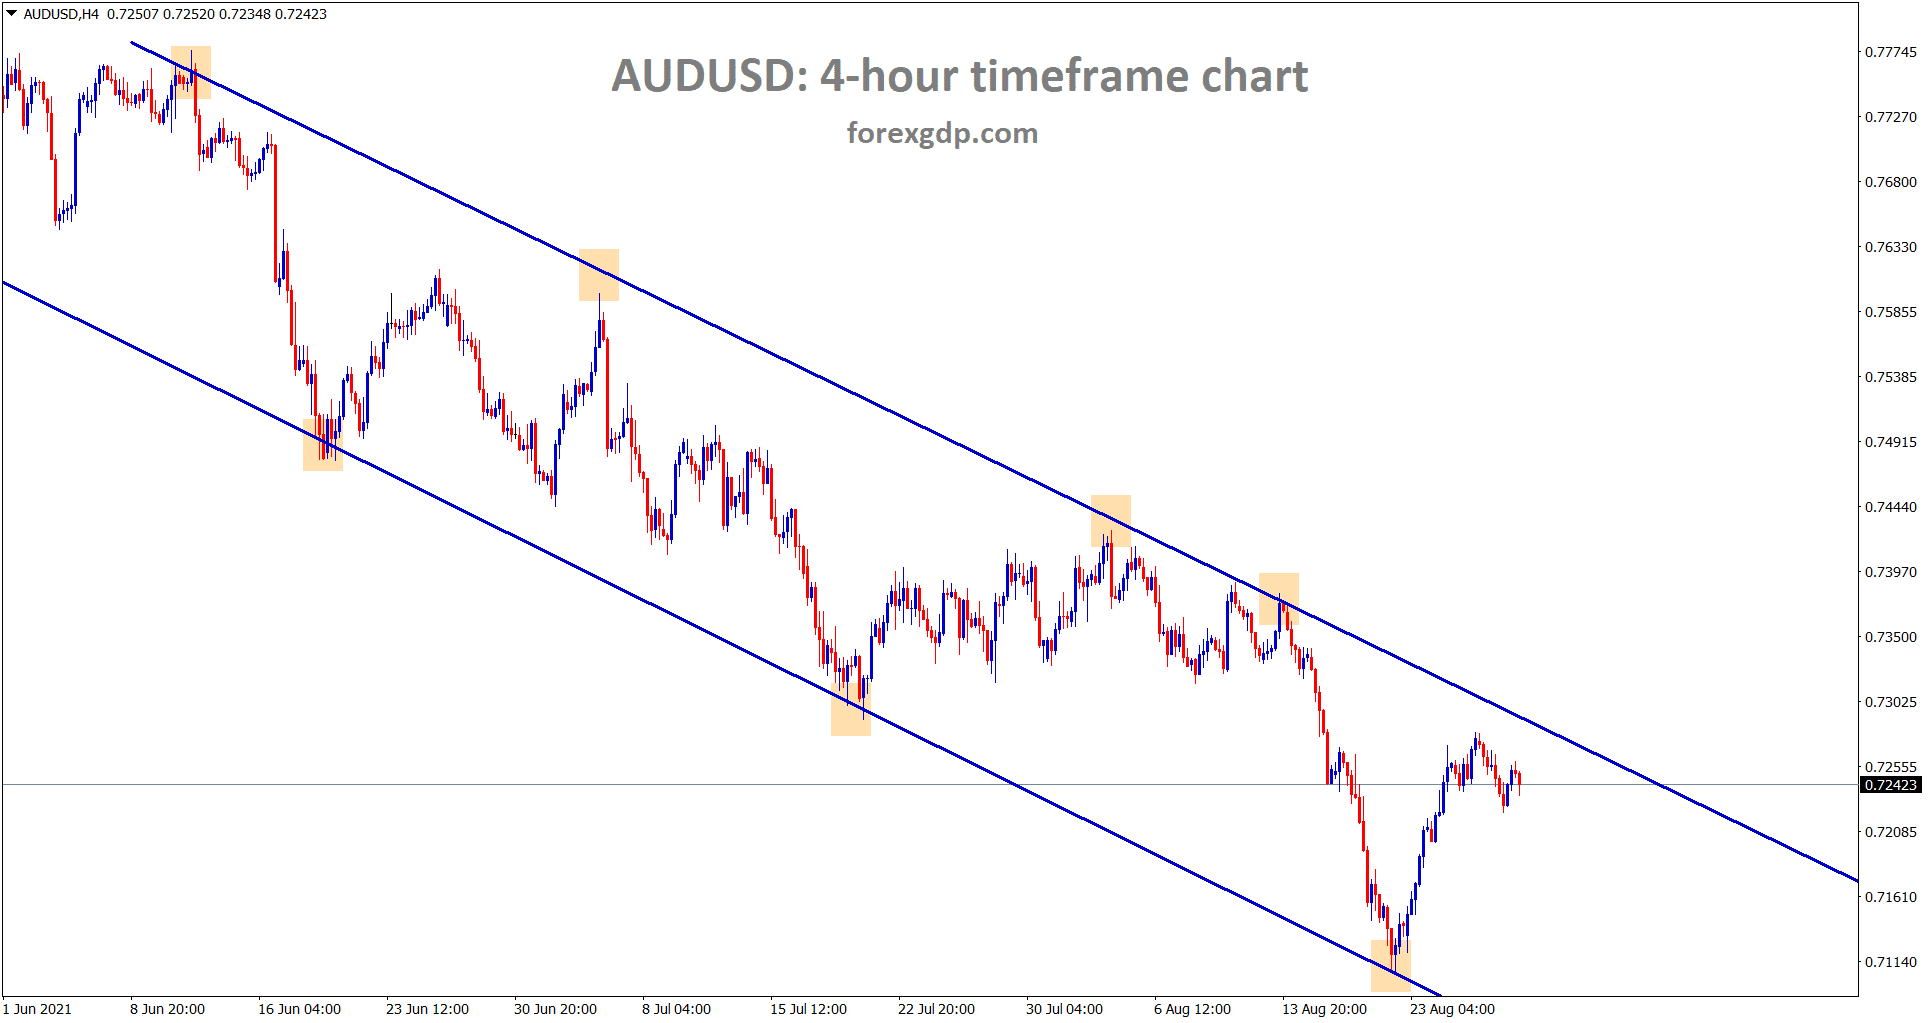 AUDUSD is still moving in a downtrend in a descending channel range